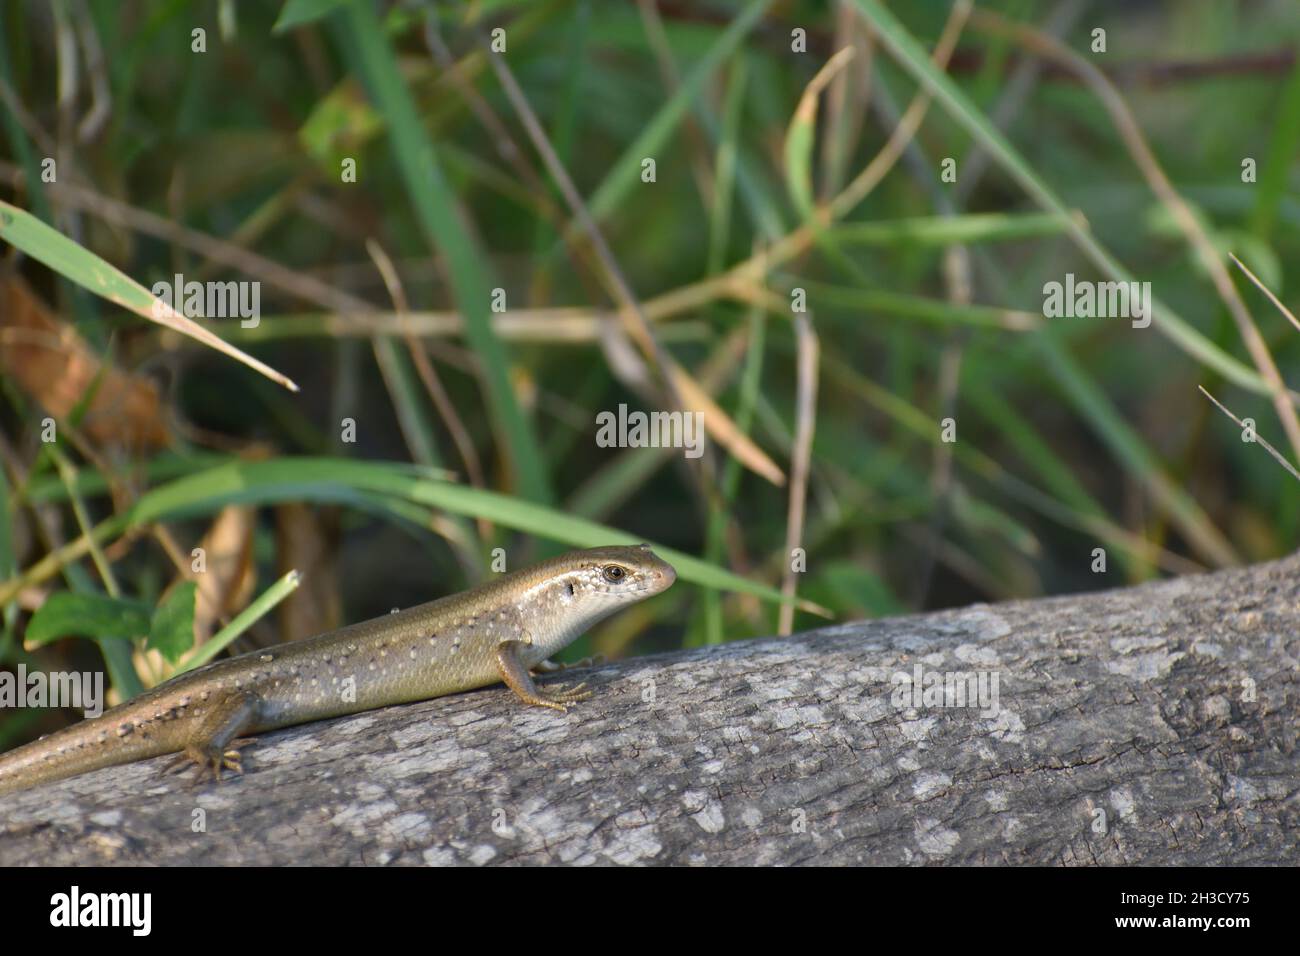 Skink crawling on wooden log with grass on the background. Eutropis multifasciata. Stock Photo